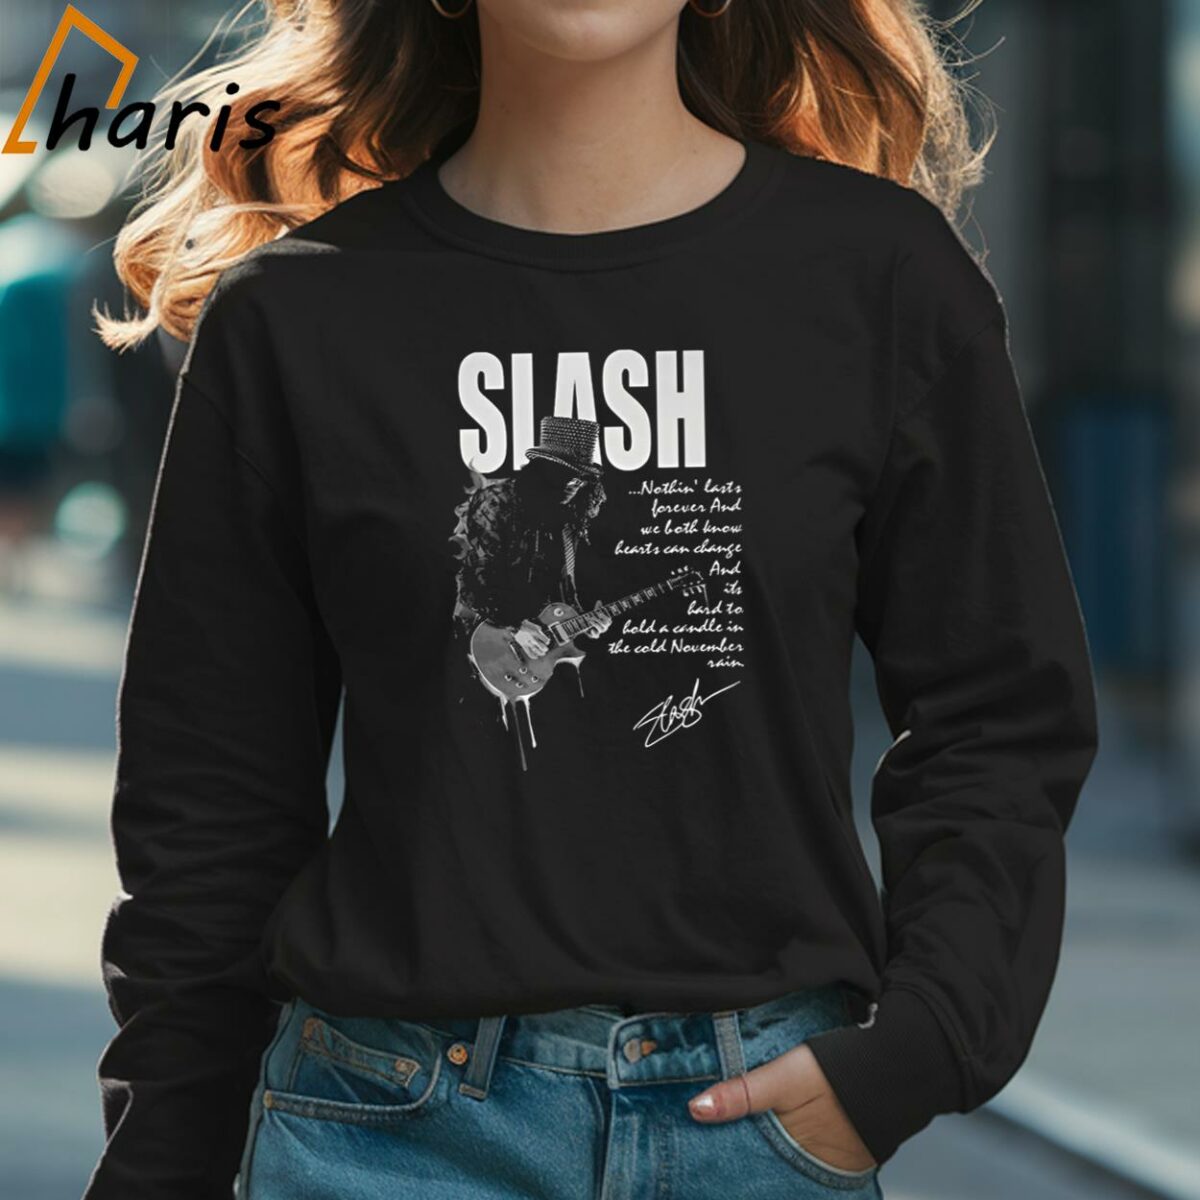 Slash Nothing Last Forever And Heart Can Change Signature T shirt 3 Long sleeve shirt